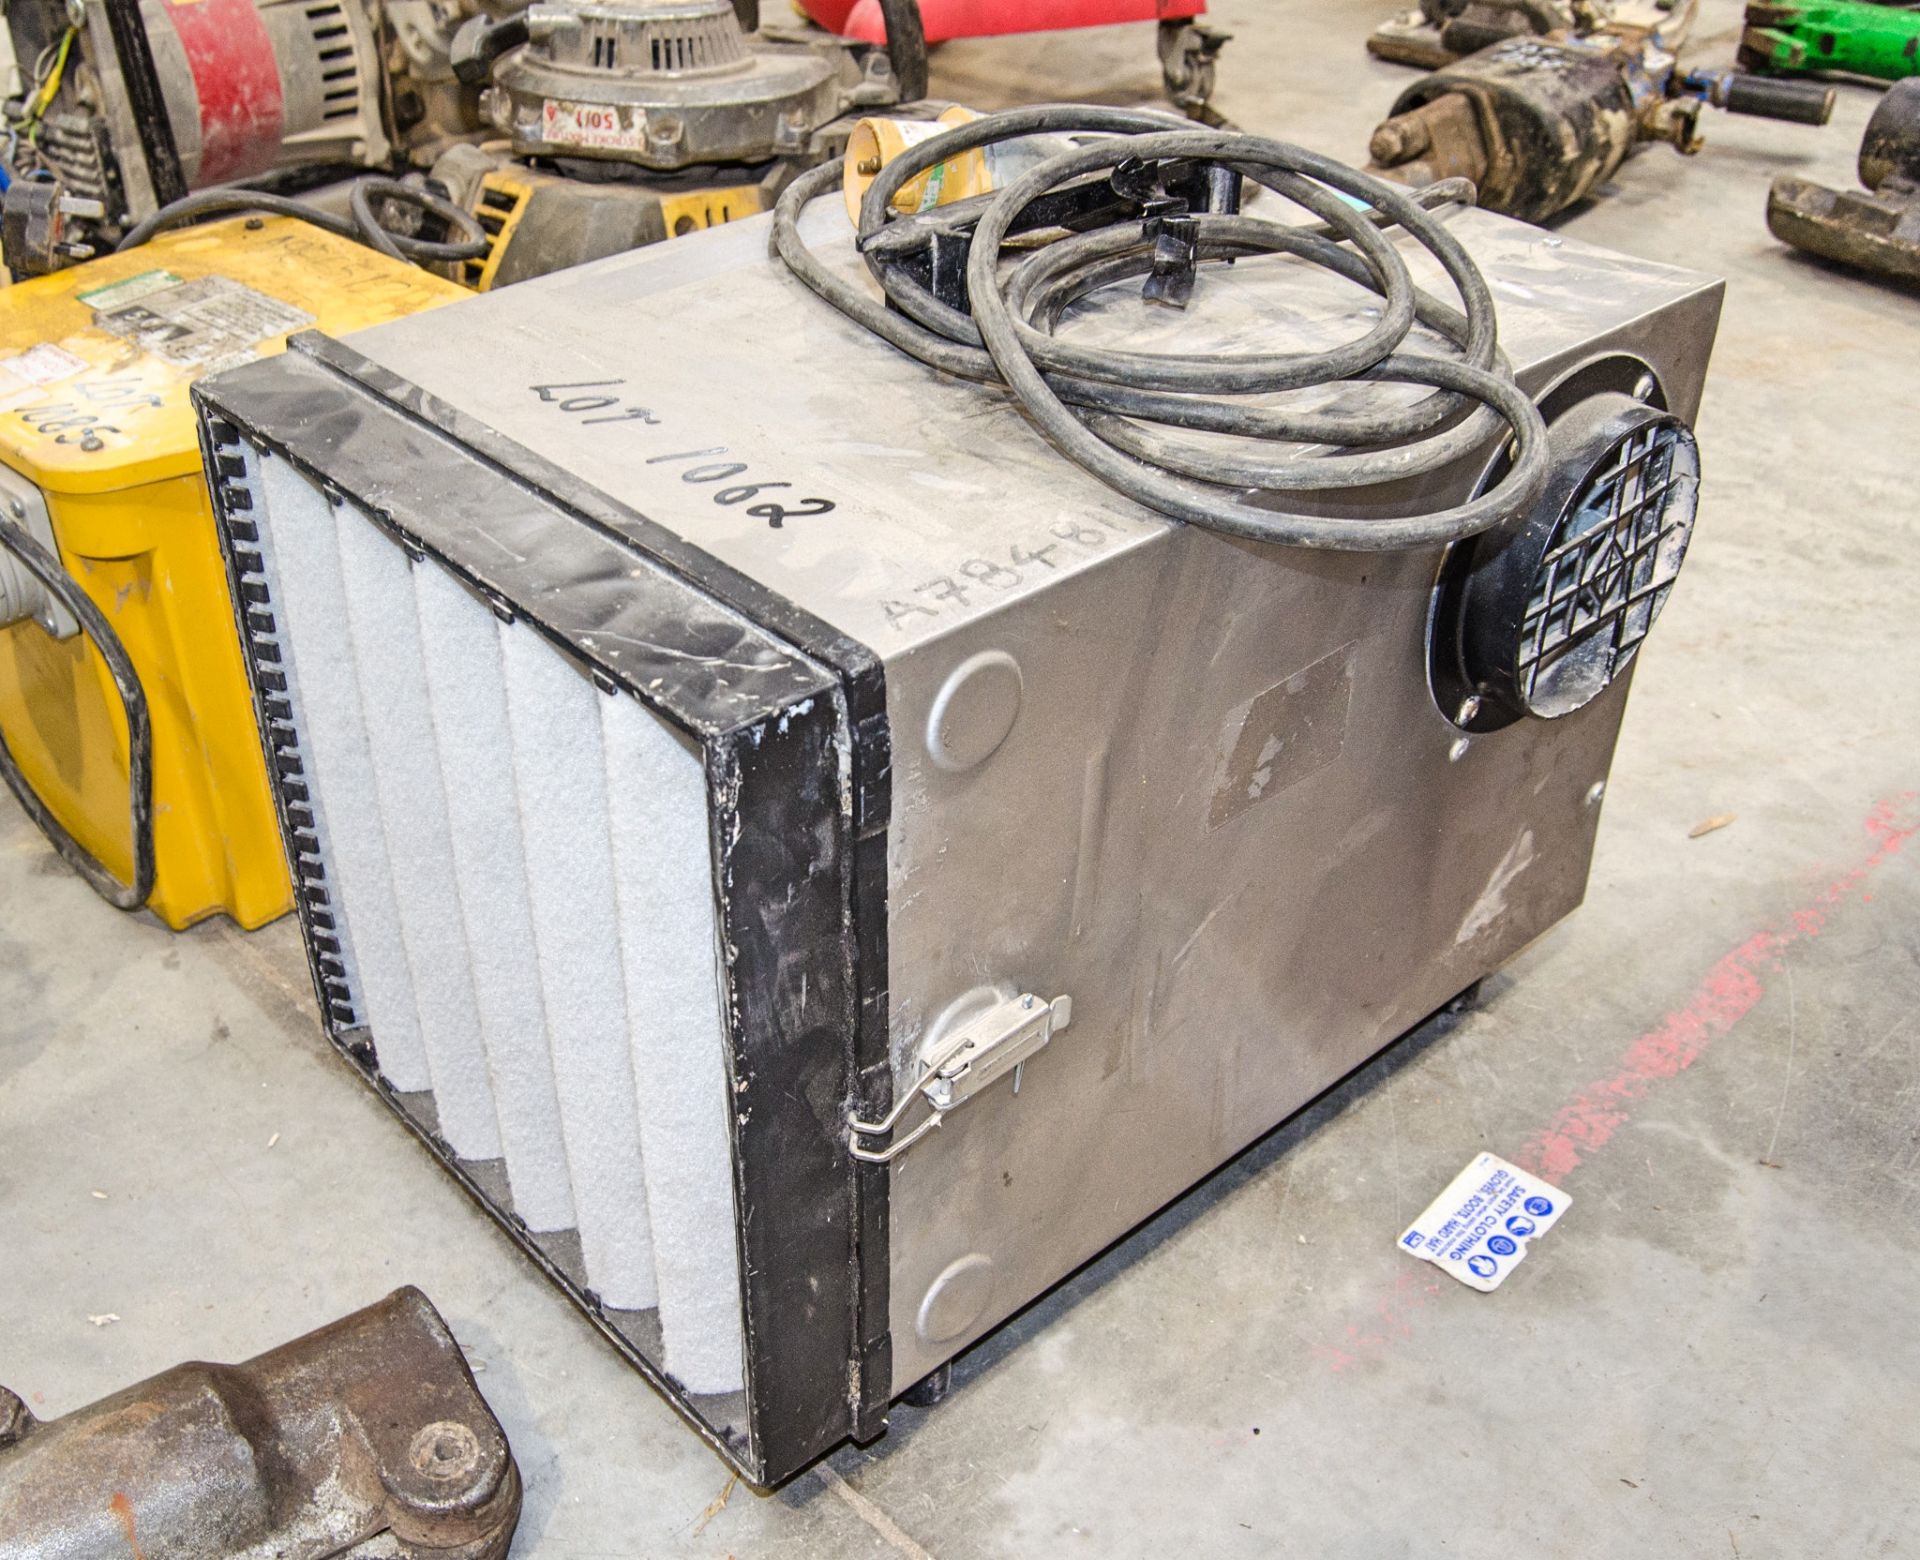 Dustcontrol Air Cube 500 110v dust extraction unit A784811 - Image 2 of 2